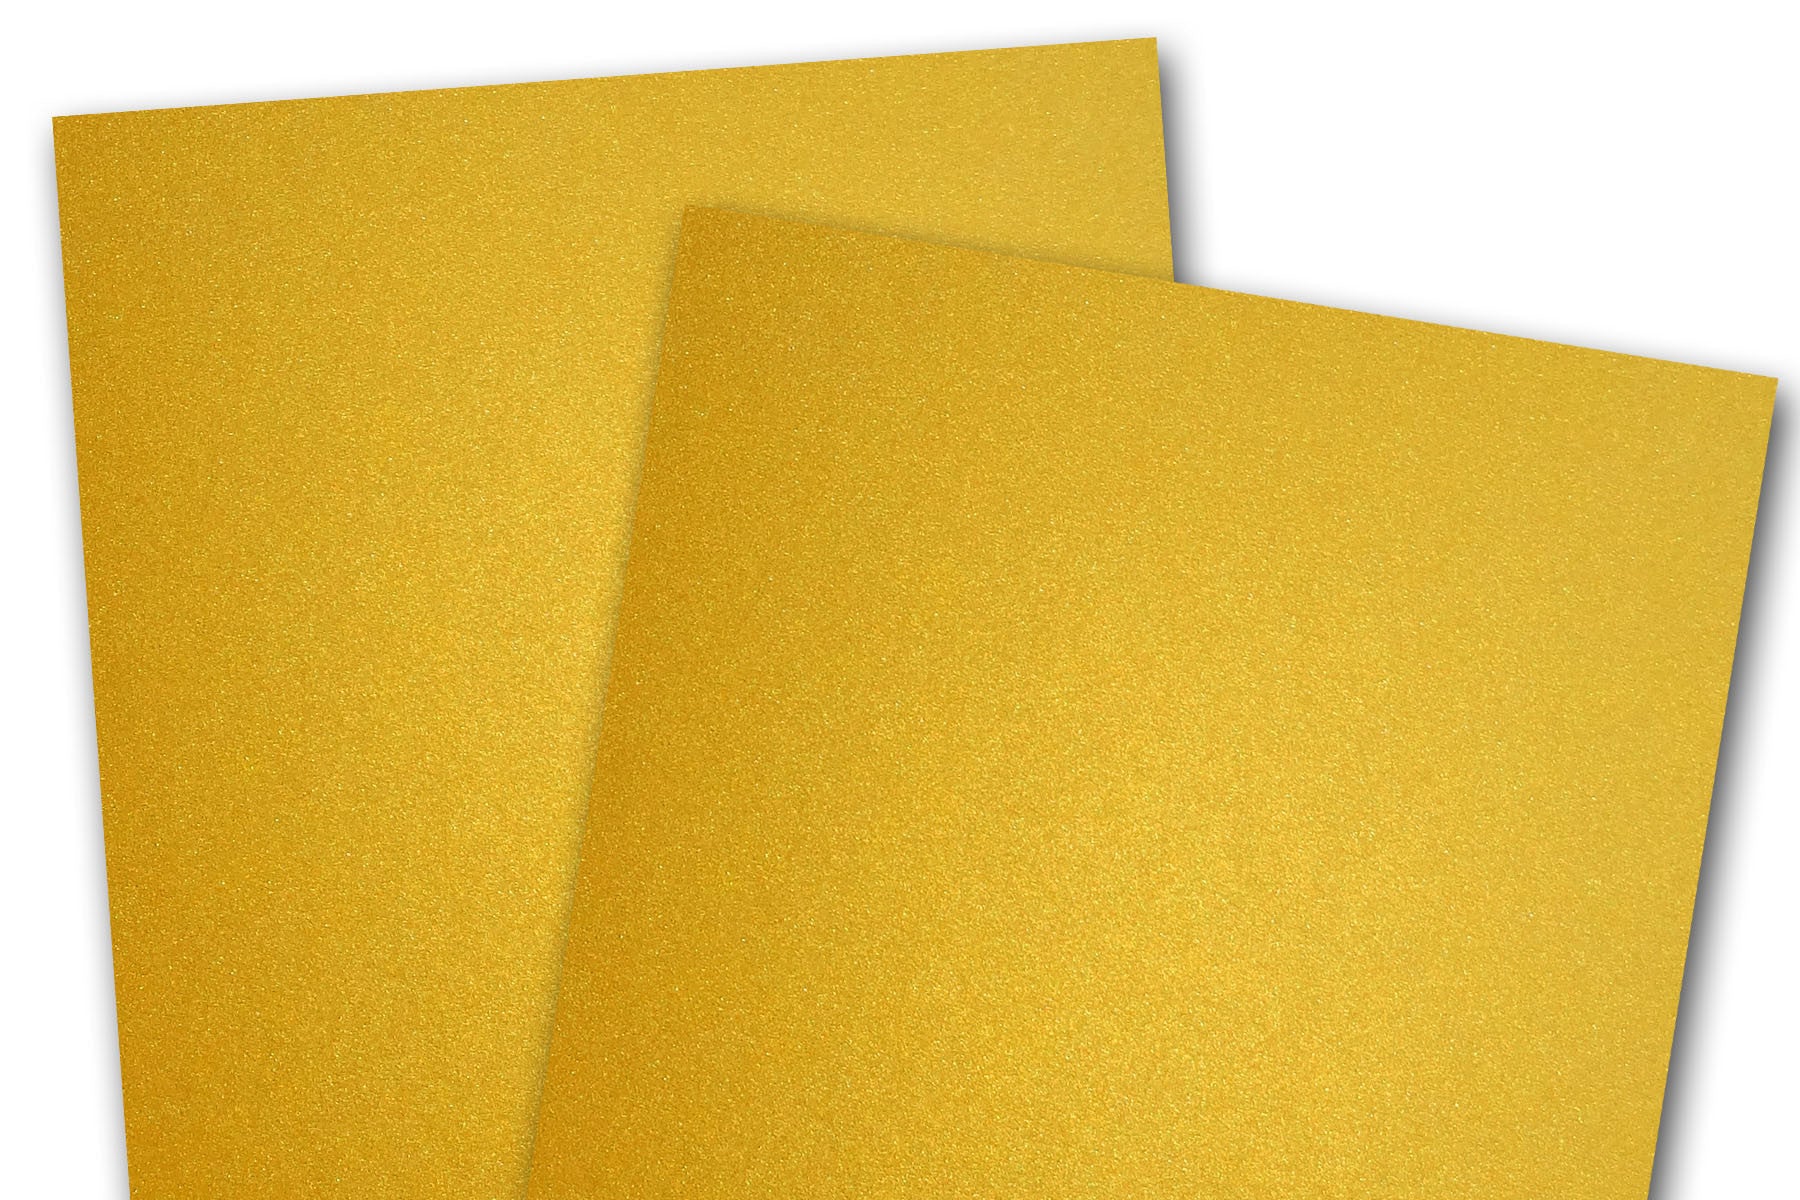 Gold Metallic Paper - 100-Pack Golden Shimmer Paper, Paper Crafting Supplies, Perfect for Flower Making, Ticket, Invitation, Stationery, Scrapbook